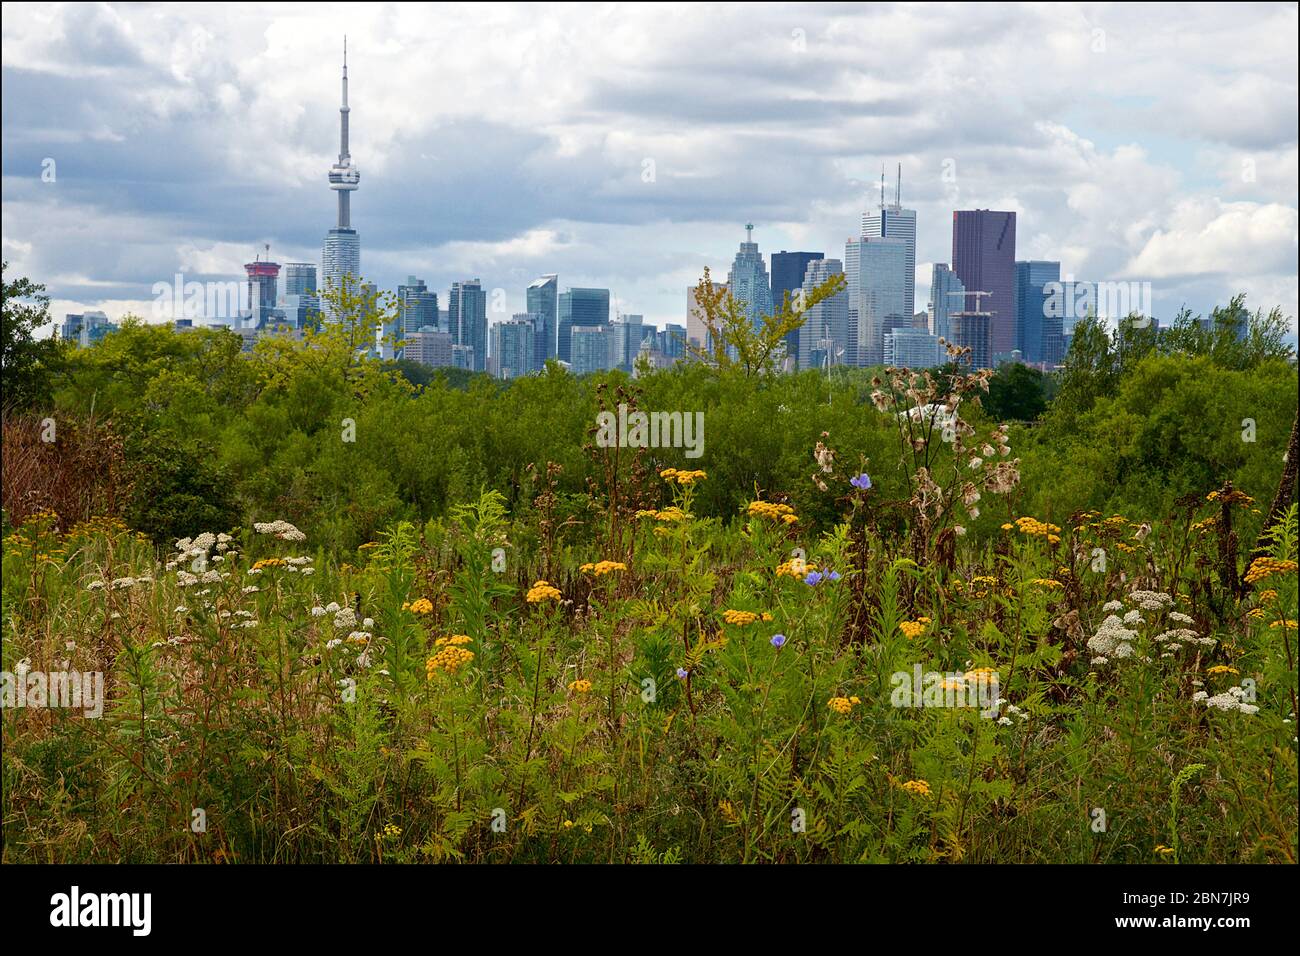 View of Toronto cityscape with natural parkland in the foreground. Stock Photo